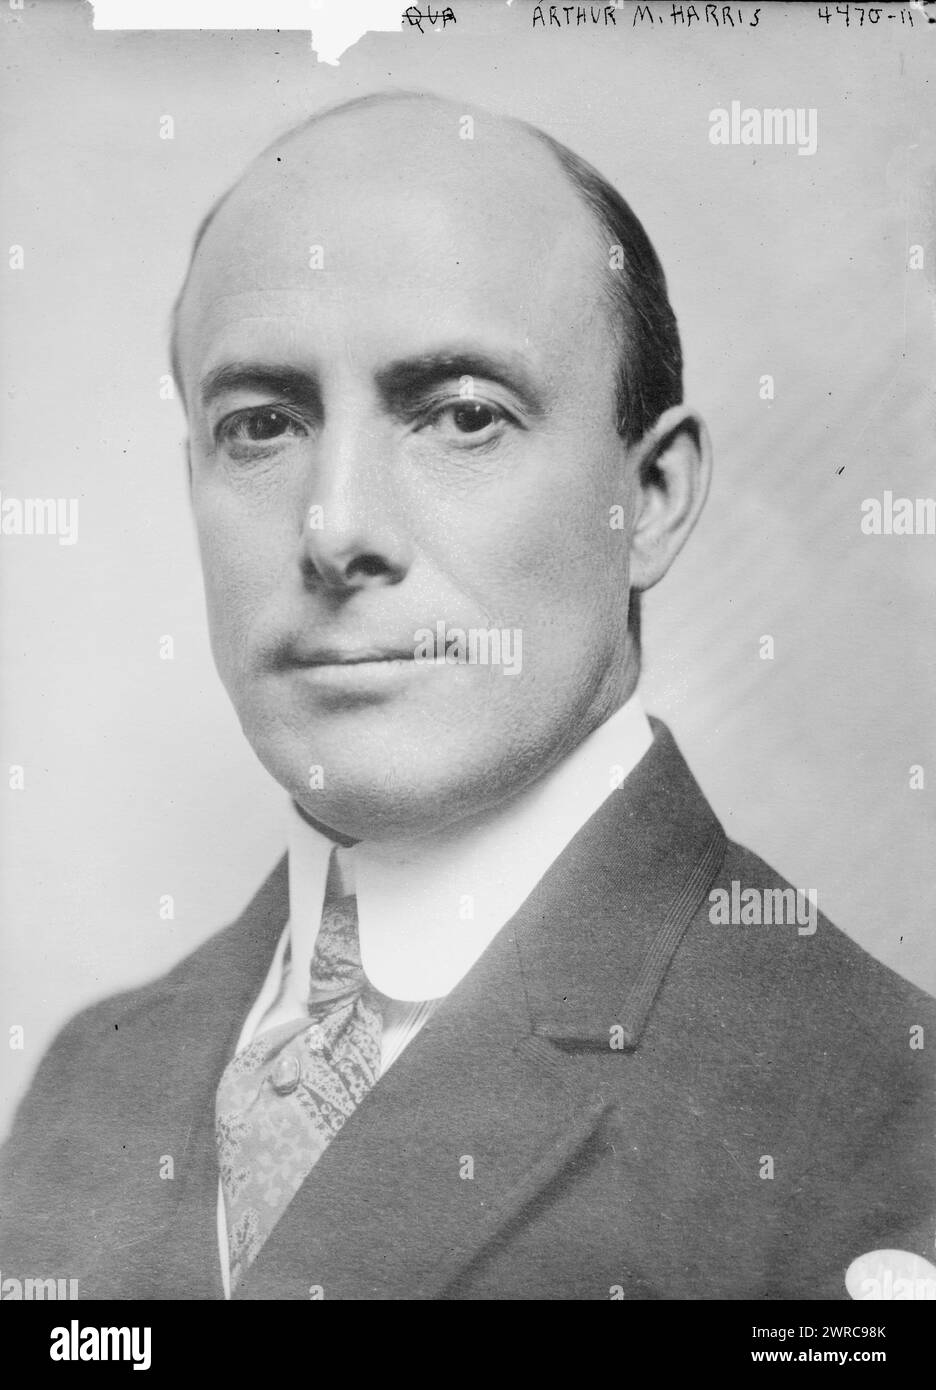 Arthur M. Harris, Photograph shows Arthur M. Harris of the bank Harris, Forbes & Co., woh went to France to direct the Y.M.C.A., between ca. 1915 and 1918, Glass negatives, 1 negative: glass Stock Photo